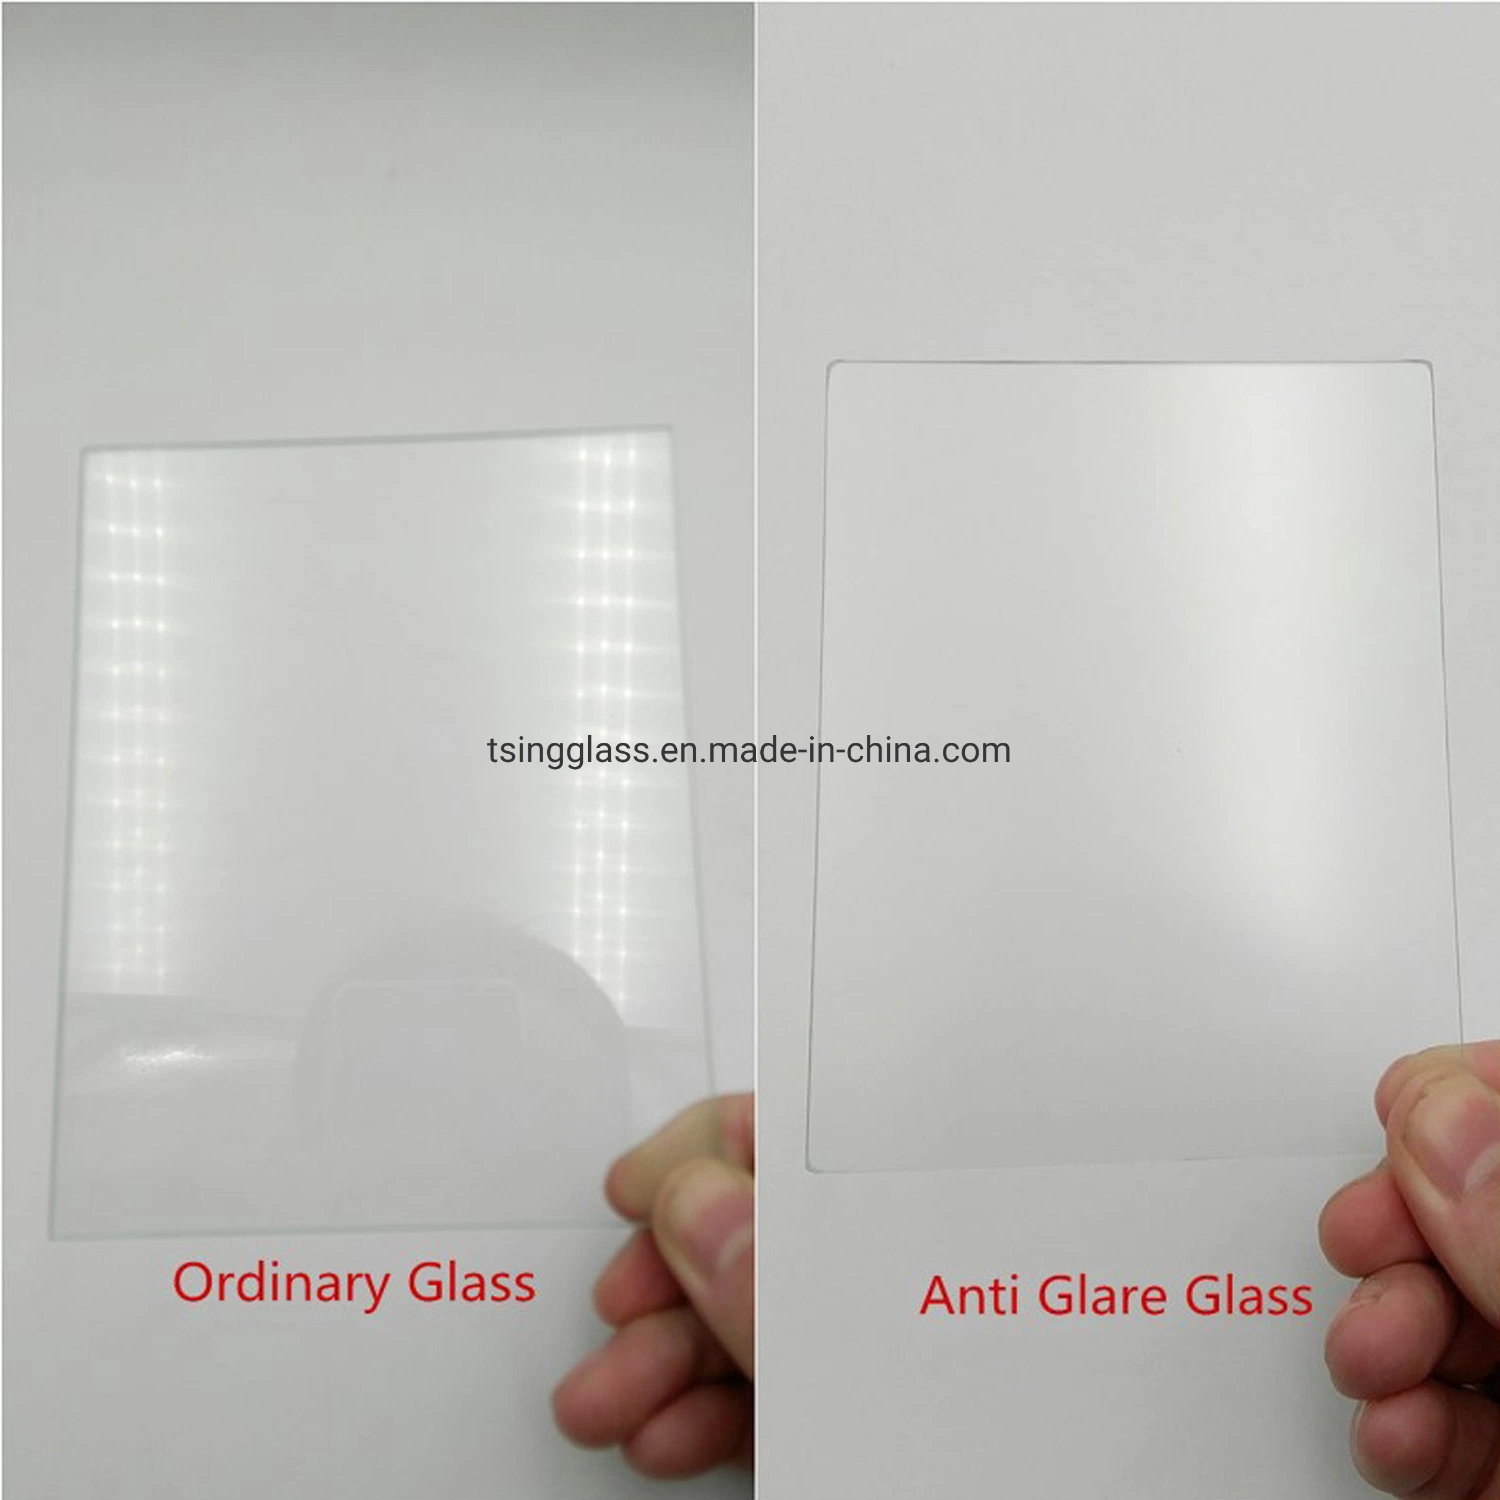 Customized Aluminosilicate Glass Anti Glare/Anti Scratch AG Coating Cover Glass for Consumer Electronics Touch Screen/ Display Cabinet